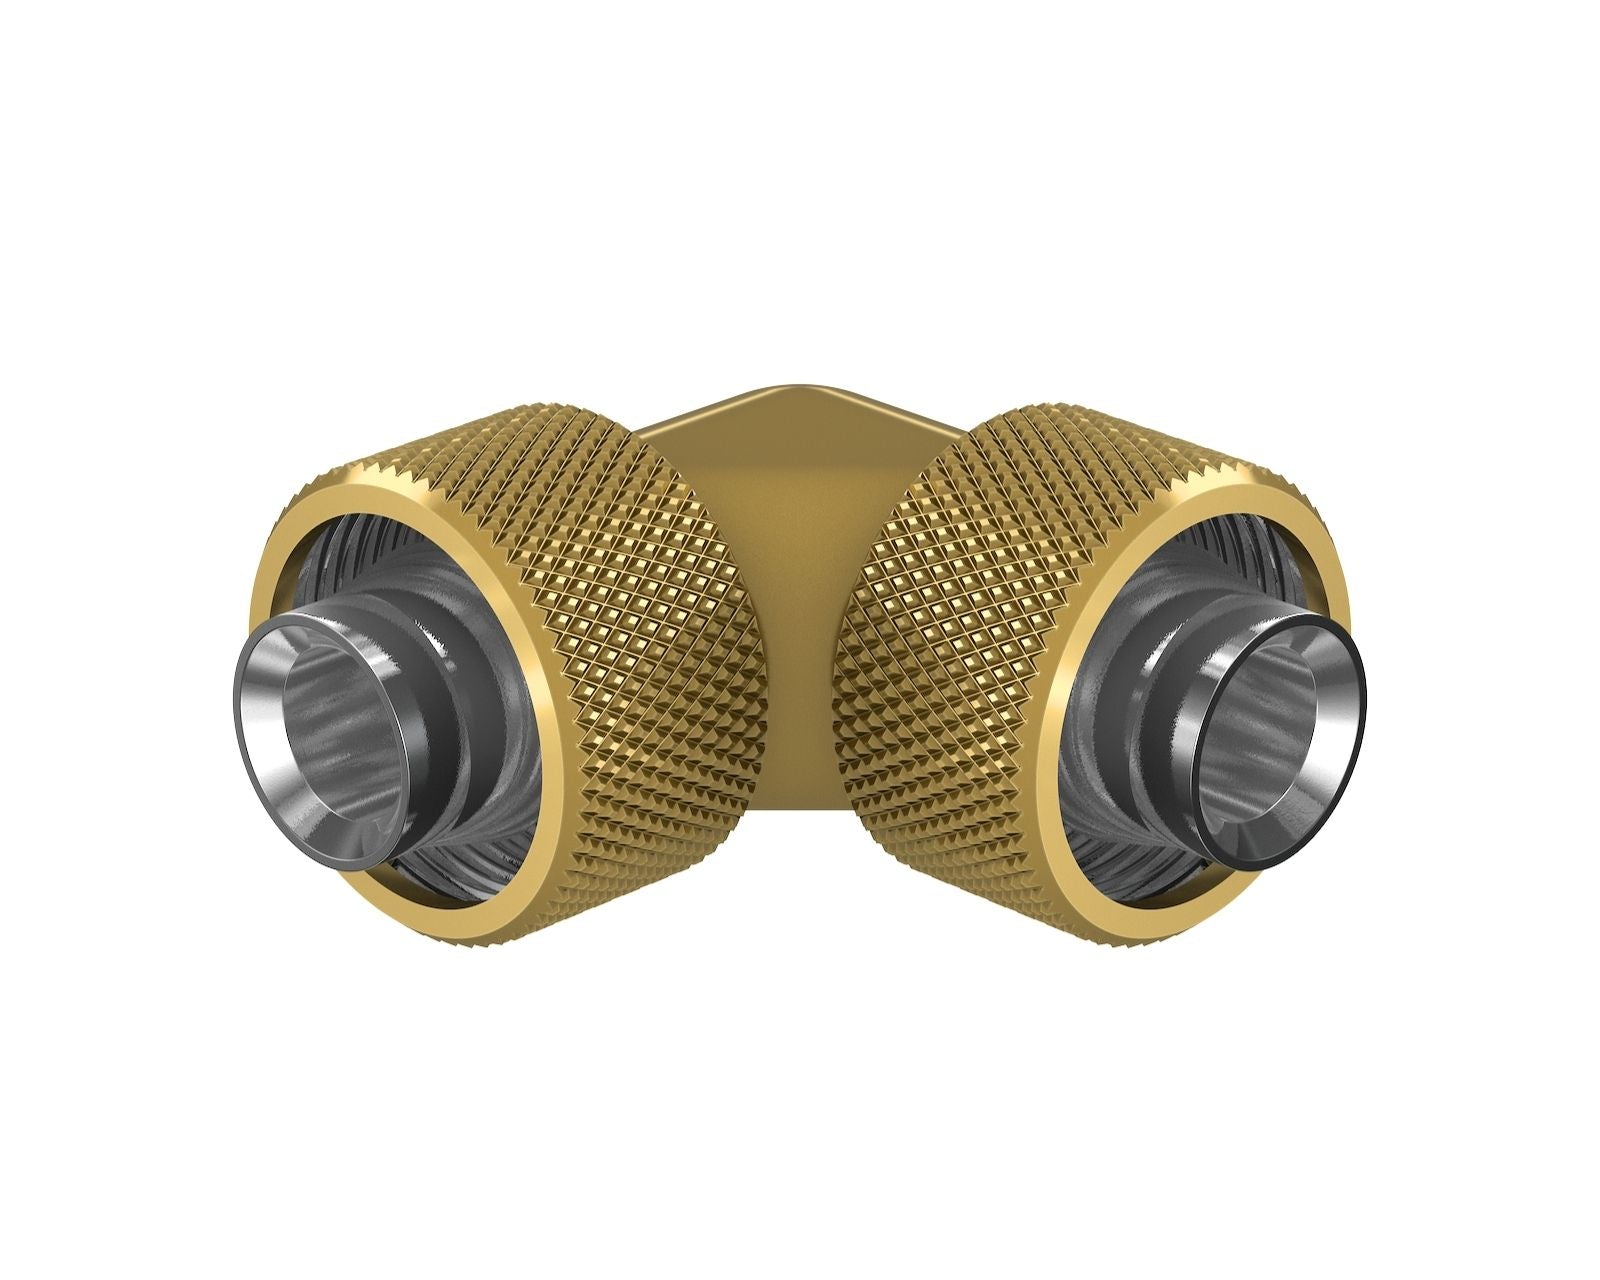 PrimoChill SecureFit SX - Premium 90 Degree Compression Fitting Set For 1/2in ID x 3/4in OD Flexible Tubing (F-SFSX3490) - Available in 20+ Colors, Custom Watercooling Loop Ready - Candy Gold